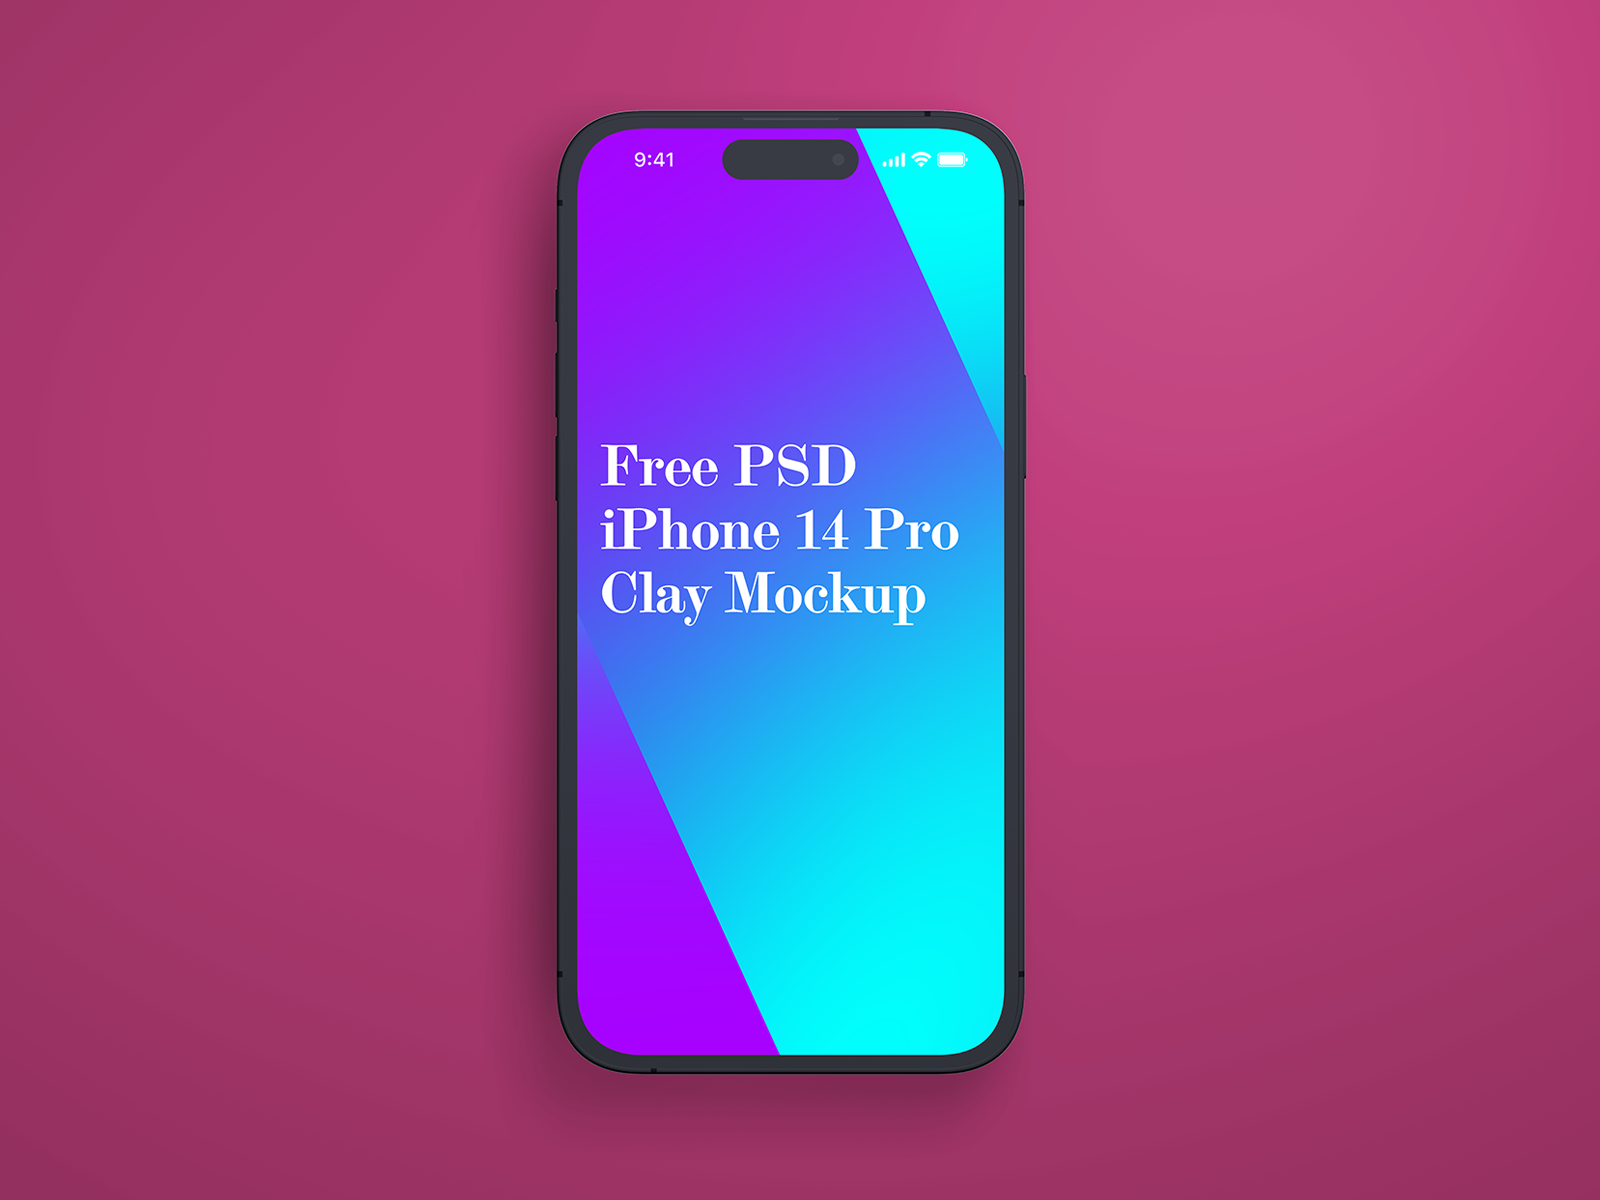 Free iPhone 14 Pro Realistic and Clay Mockup with Status Bar